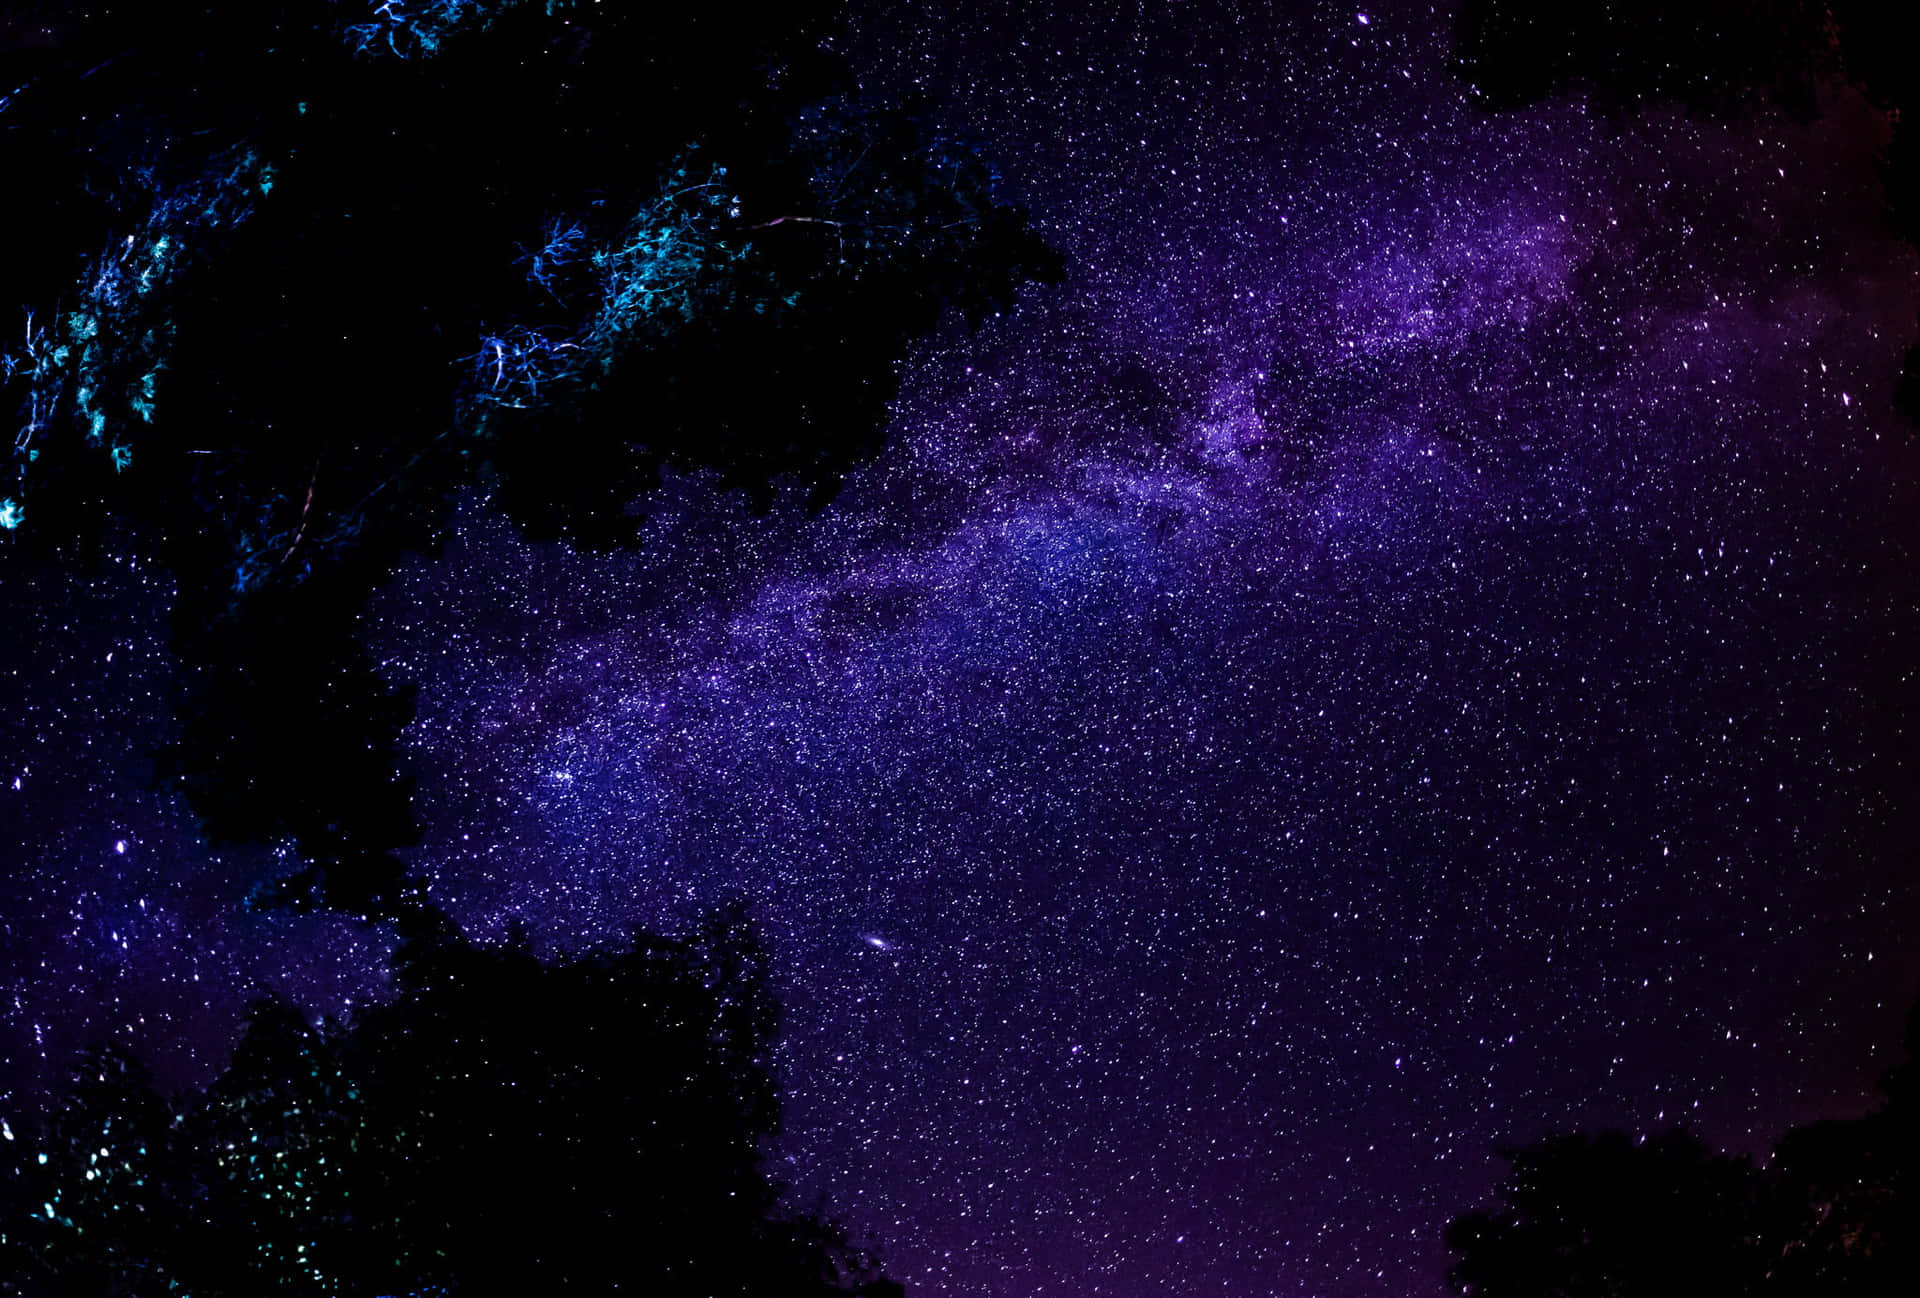 "Glimpse of a Mystifying Black and Purple Galaxy" Wallpaper